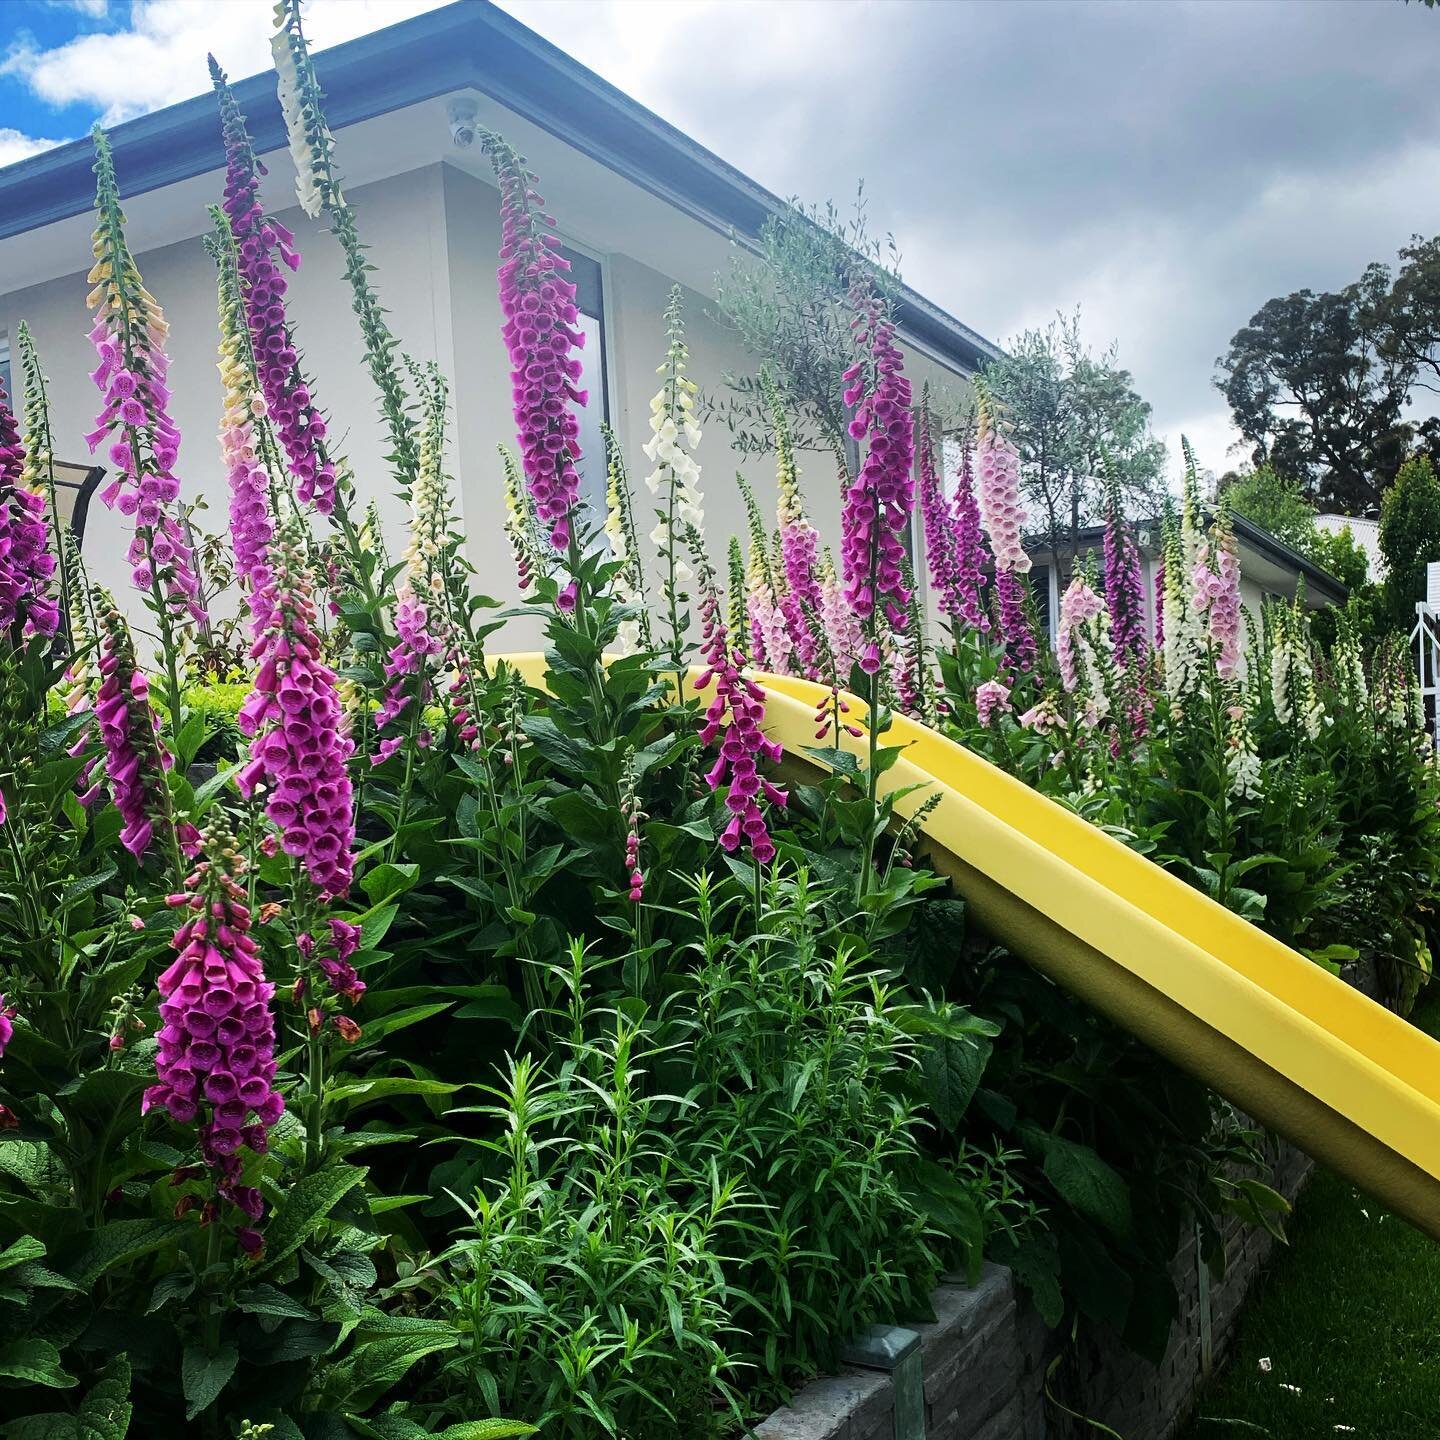 It&rsquo;s a bit of a #foxglove explosion in my garden right now! 

There&rsquo;s so much of nature&rsquo;s goodness that inspires, and this current view of mine is no exception, I figured it&rsquo;d be rude not to share!
Happy Friday!!